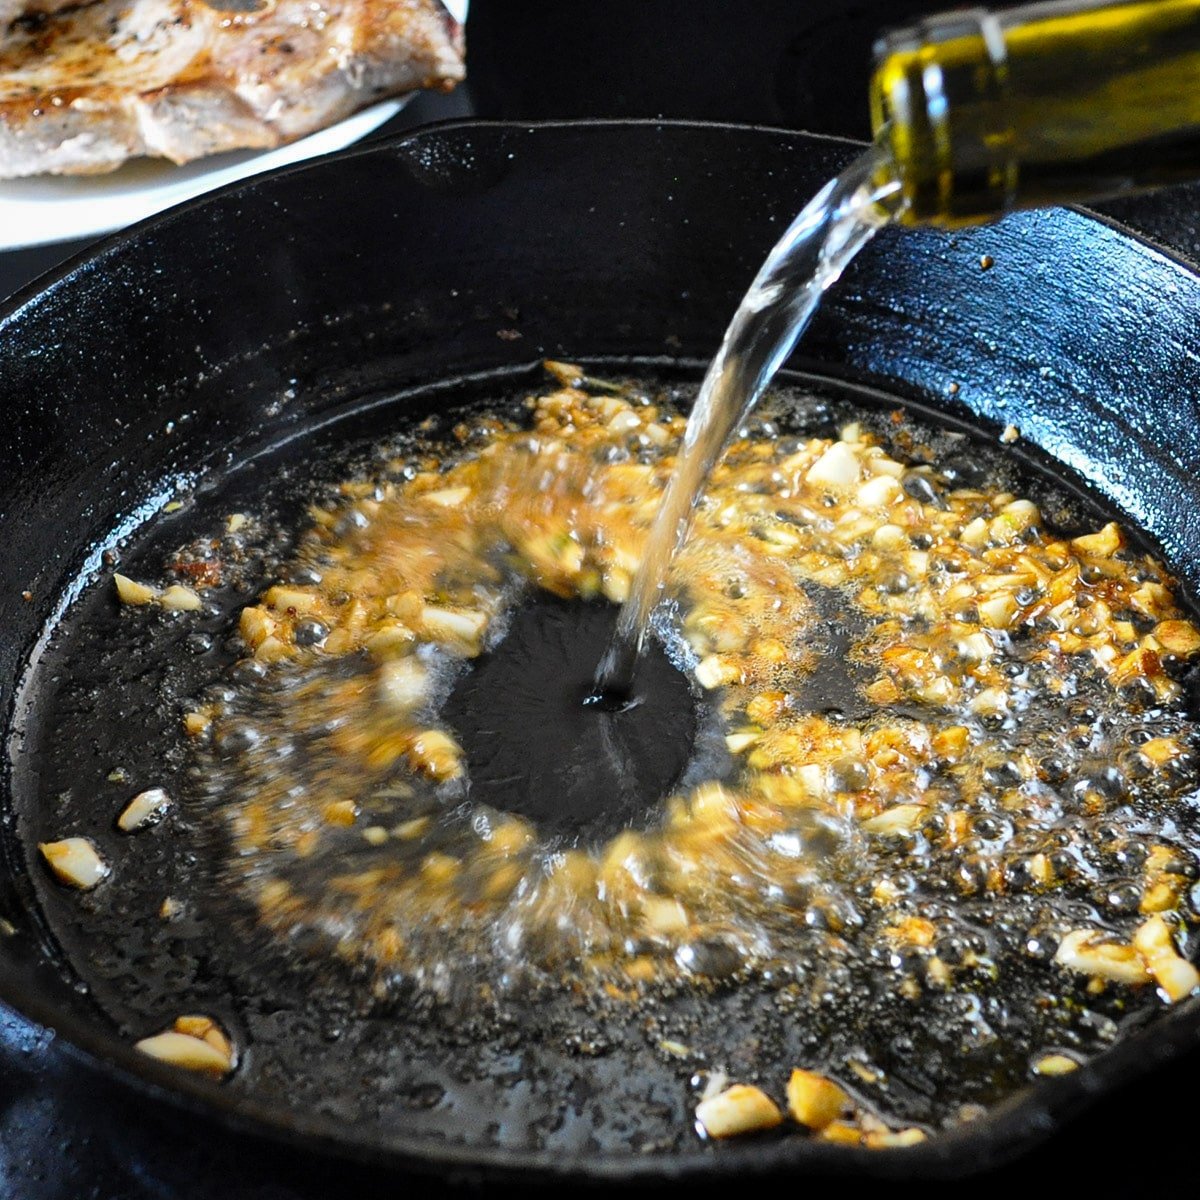 garlic and white wine being poured in a hot skillet